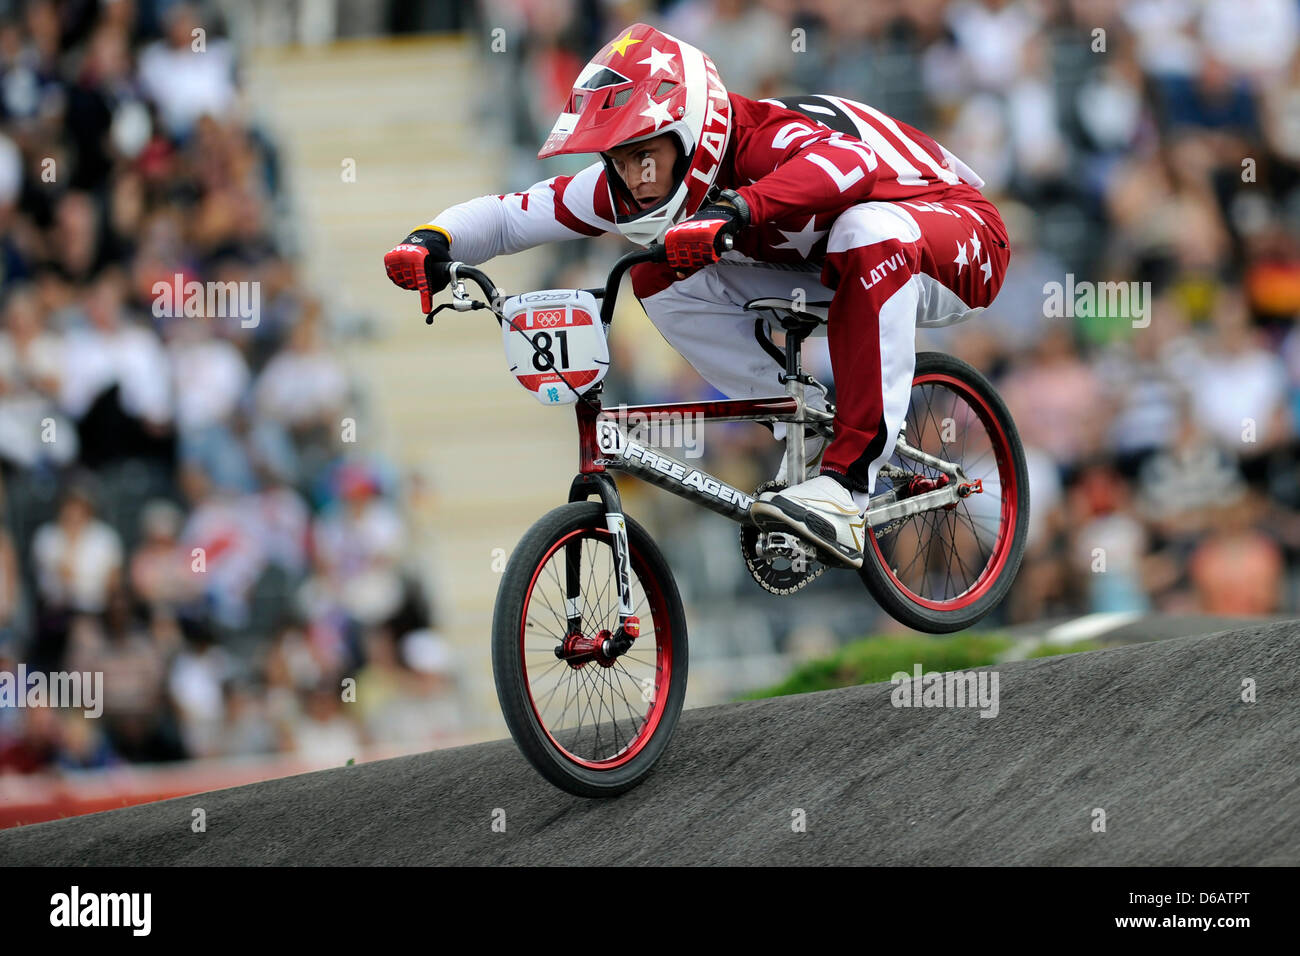 Latvia's Maris Strombergs in action during the BMX Seeding Run at the  London 2012 Olympic Games, London, Great Britain, 08 August 2012. Photo:  Marius Becker dpa Stock Photo - Alamy